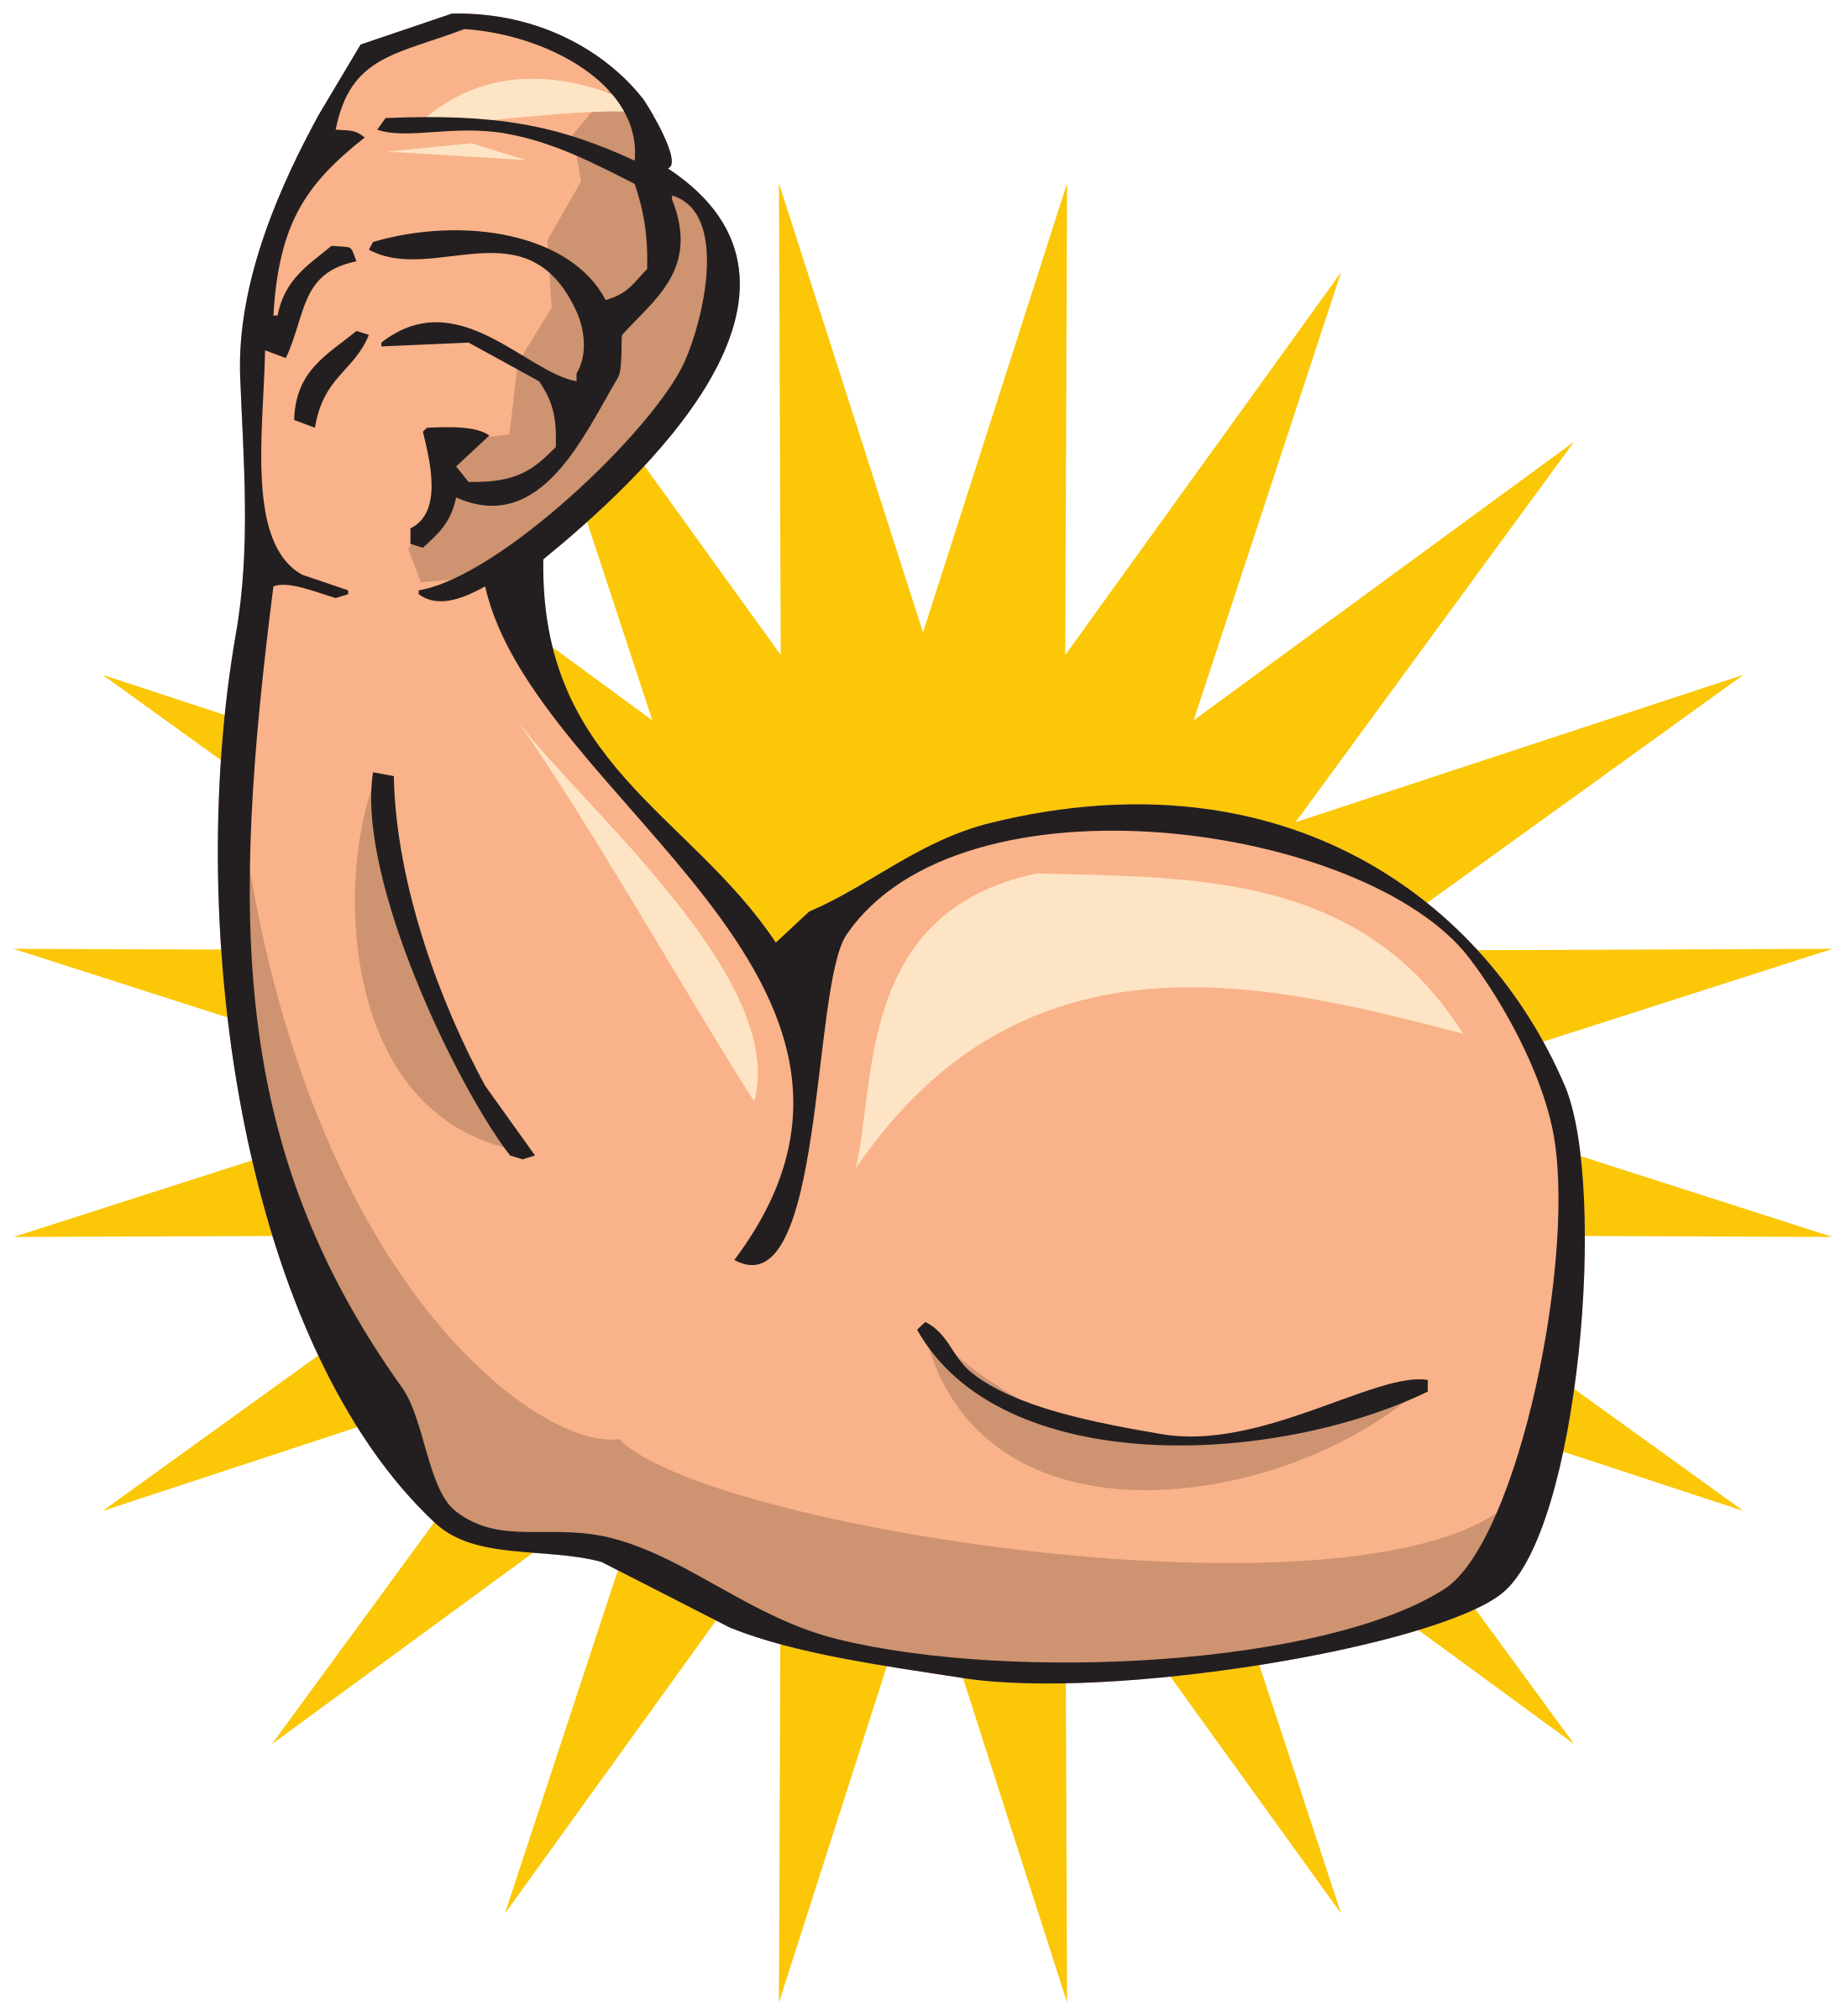 Arm big image png. Exercising clipart strong